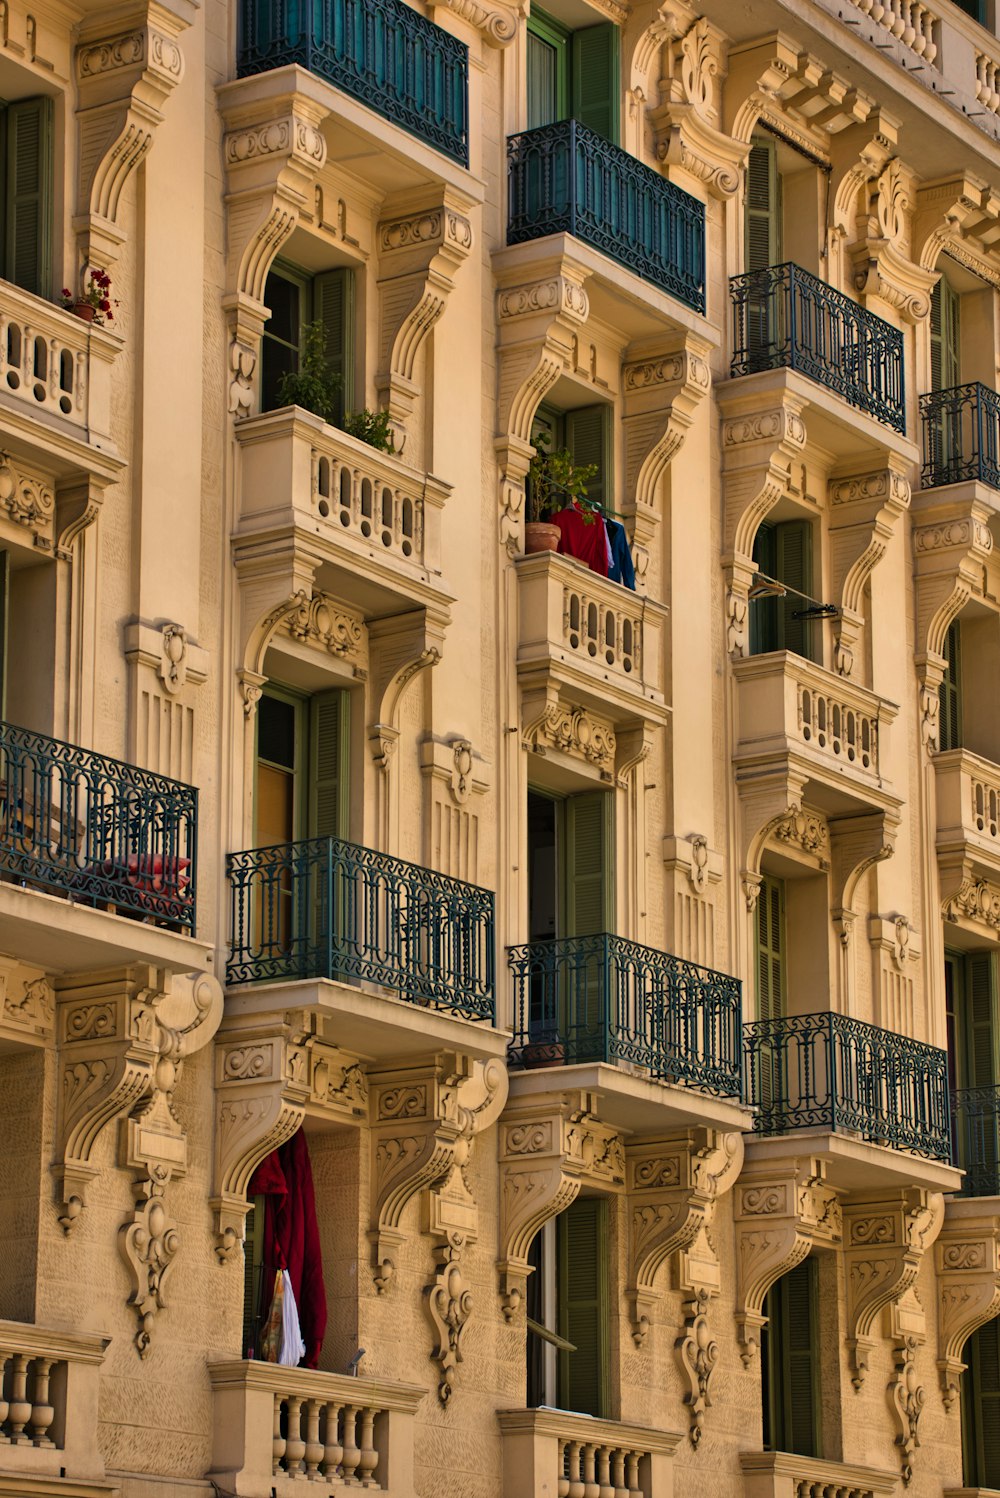 a tall building with balconies and balconies on the balconies